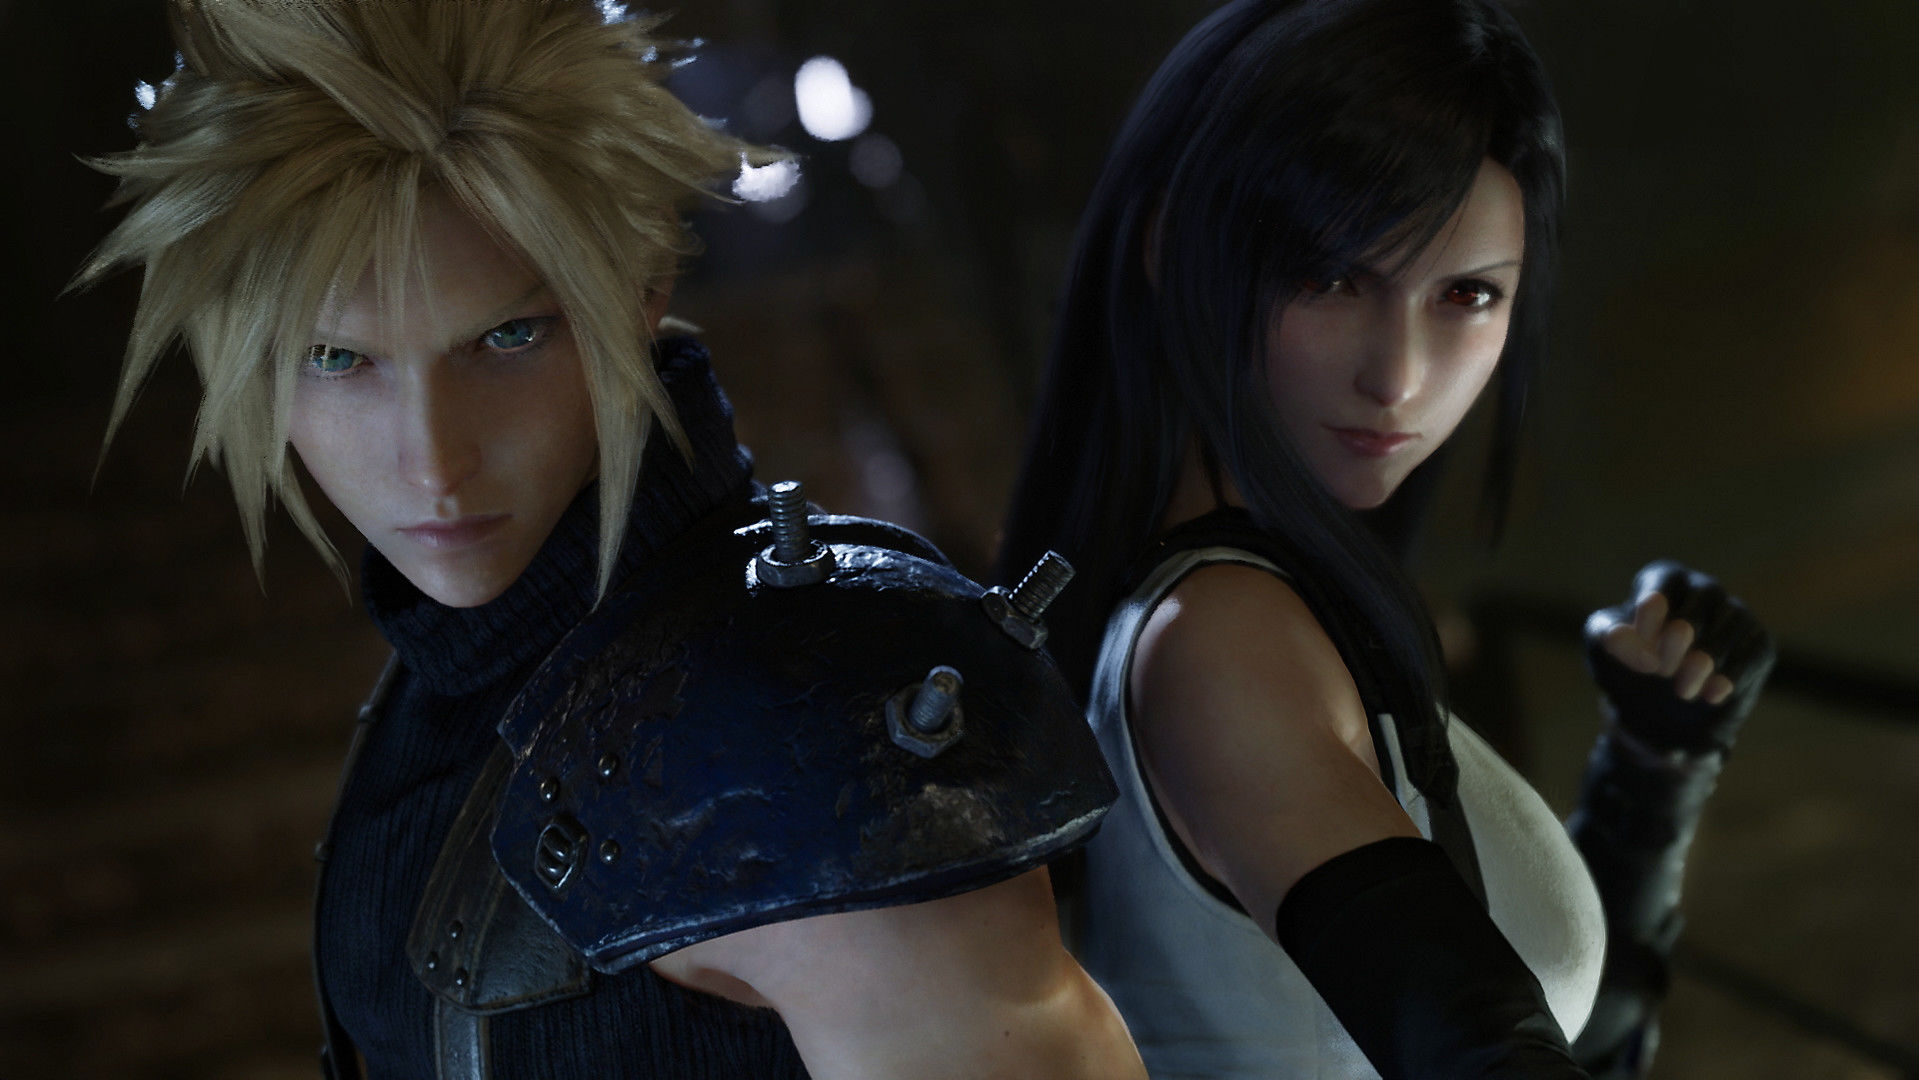 Cloud and Tifa in Final Fantasy VII Remake